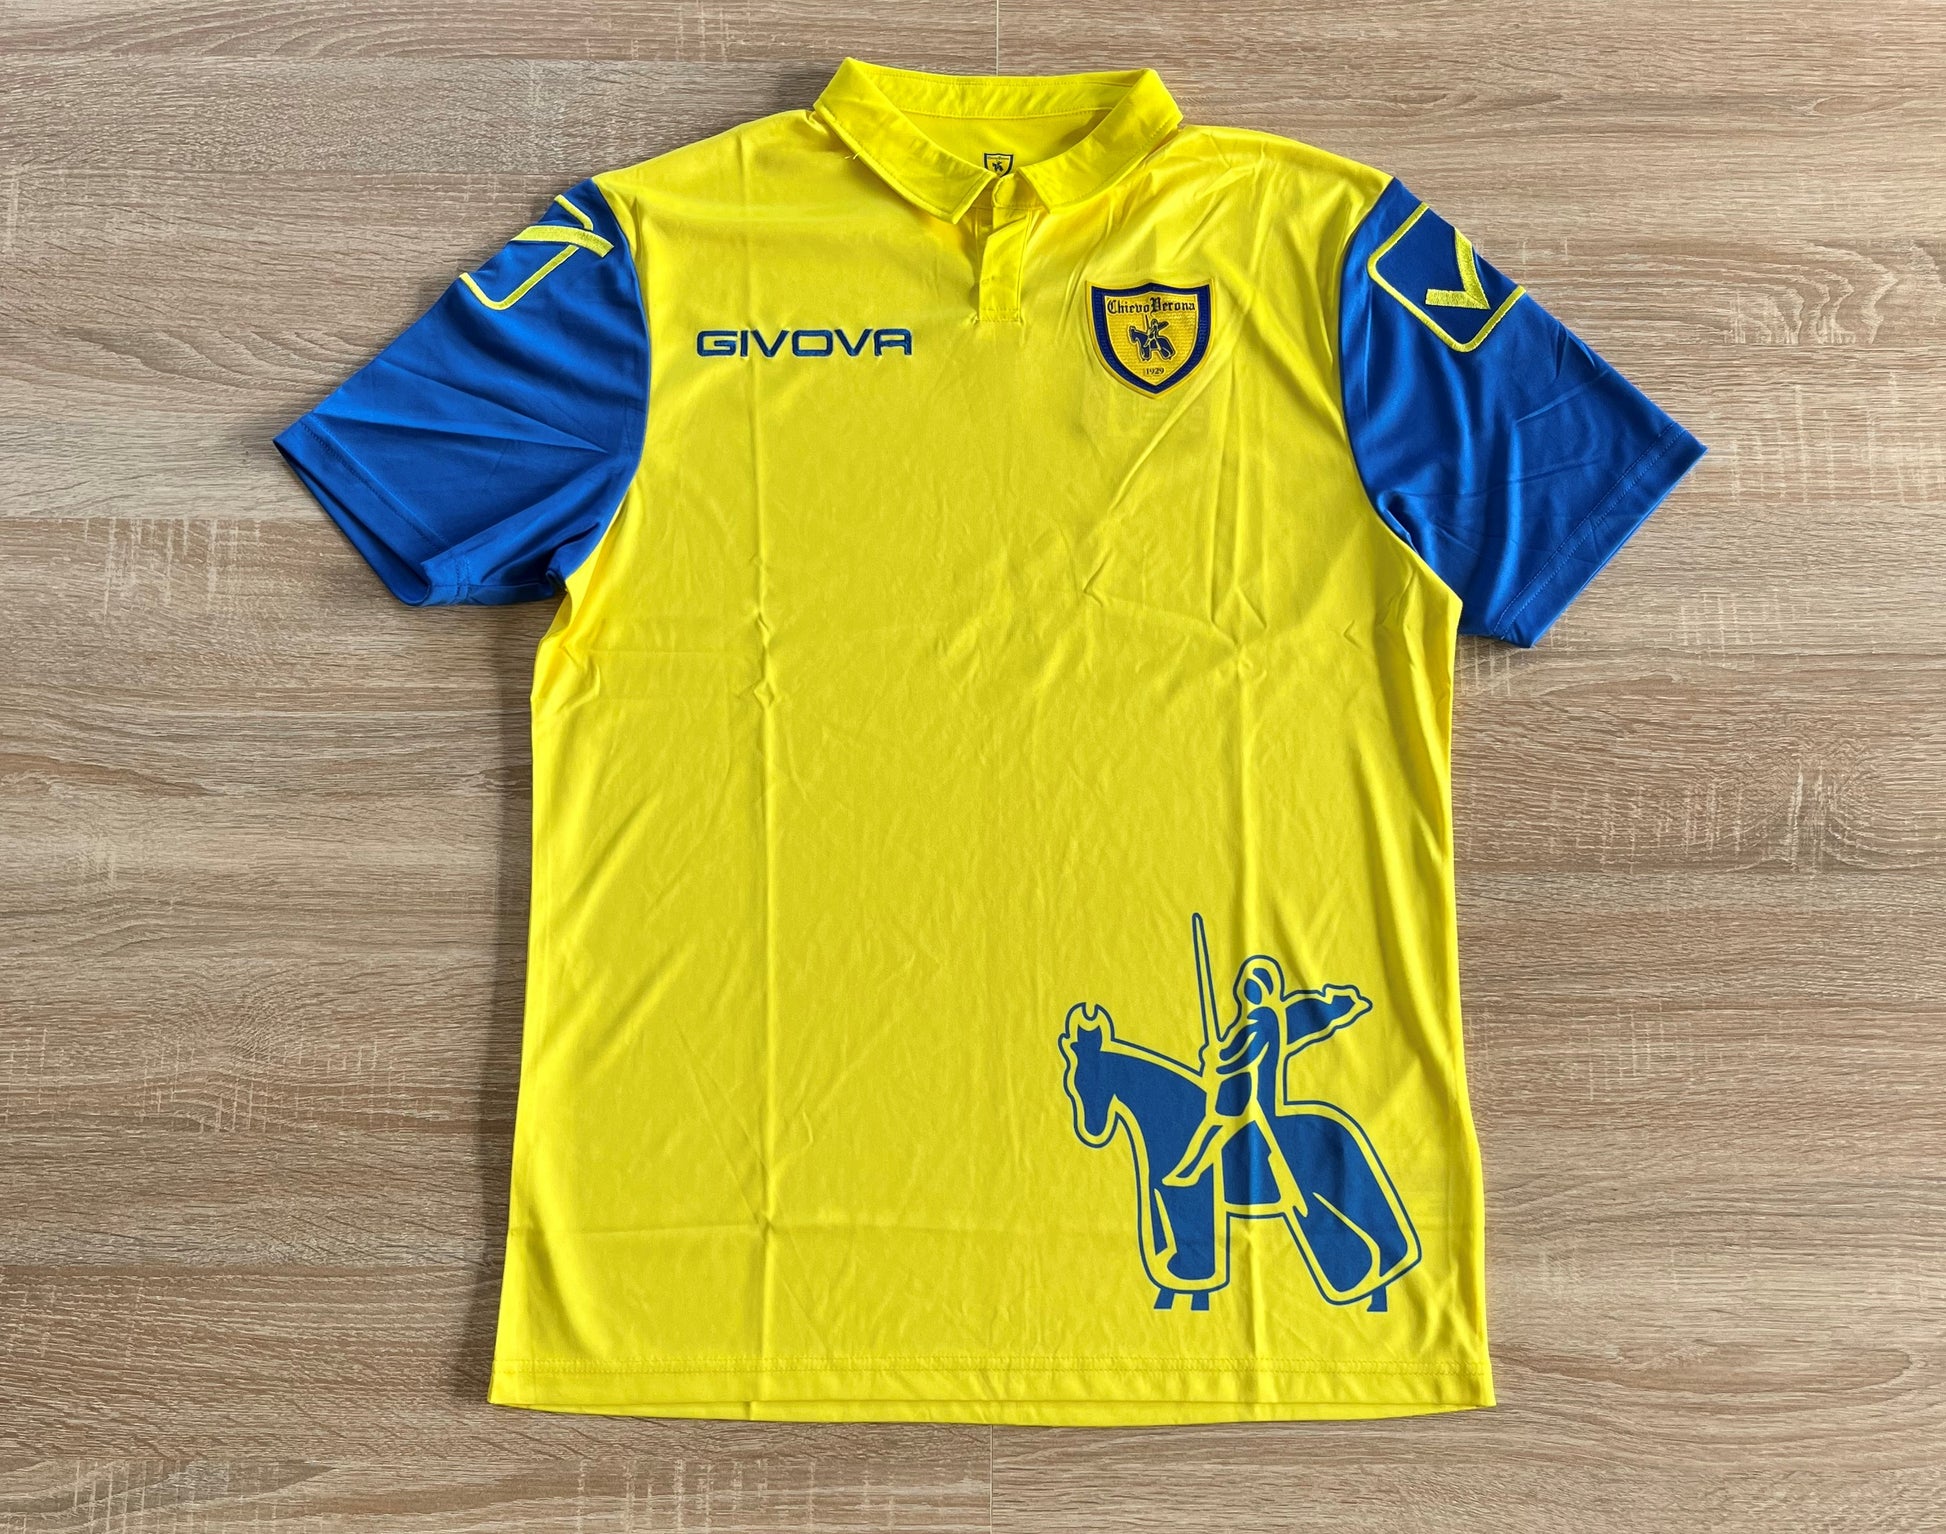 Chievo Verona Home Shirt from 2019-2020: The home jersey worn by Chievo Verona during the 2019-2020 season. Featuring the club's emblem and a unique design, this shirt reflects the team's representation and performance throughout that particular period.